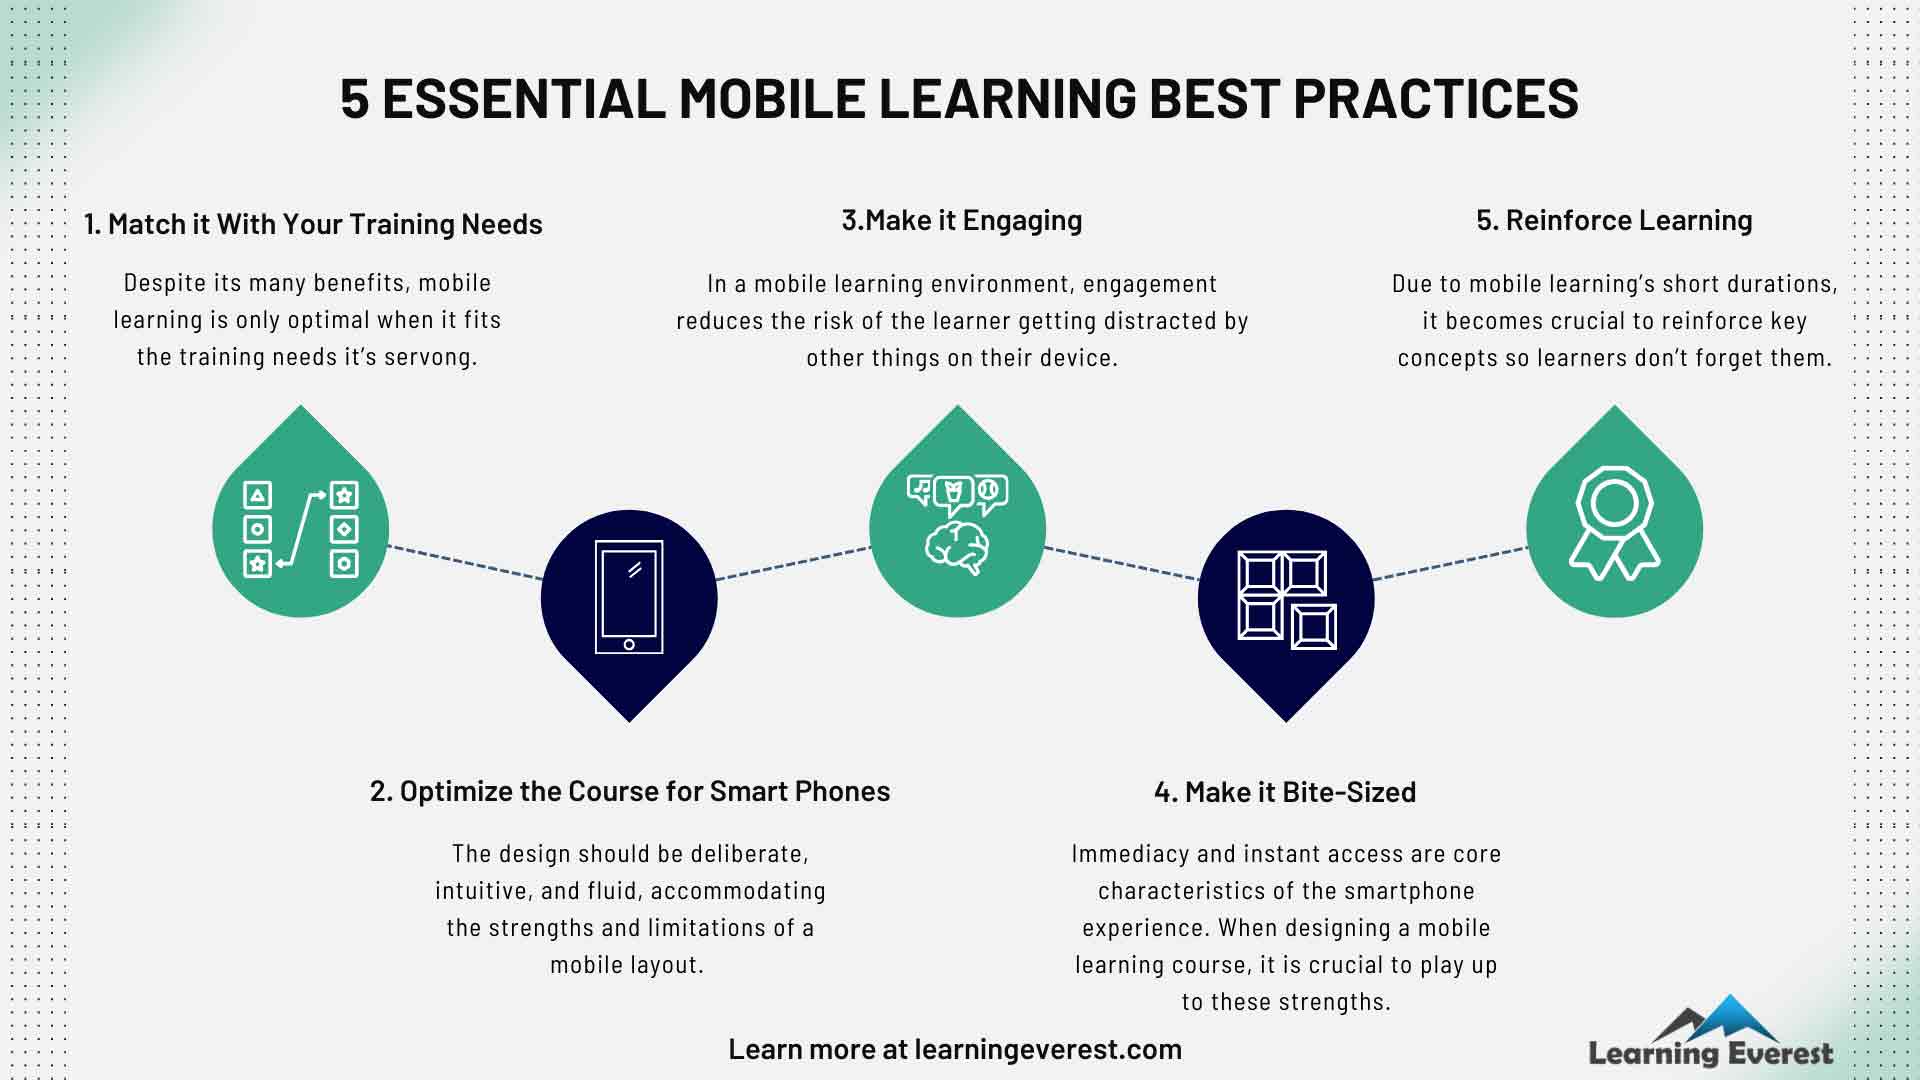 5 Essential Mobile Learning Best Practices